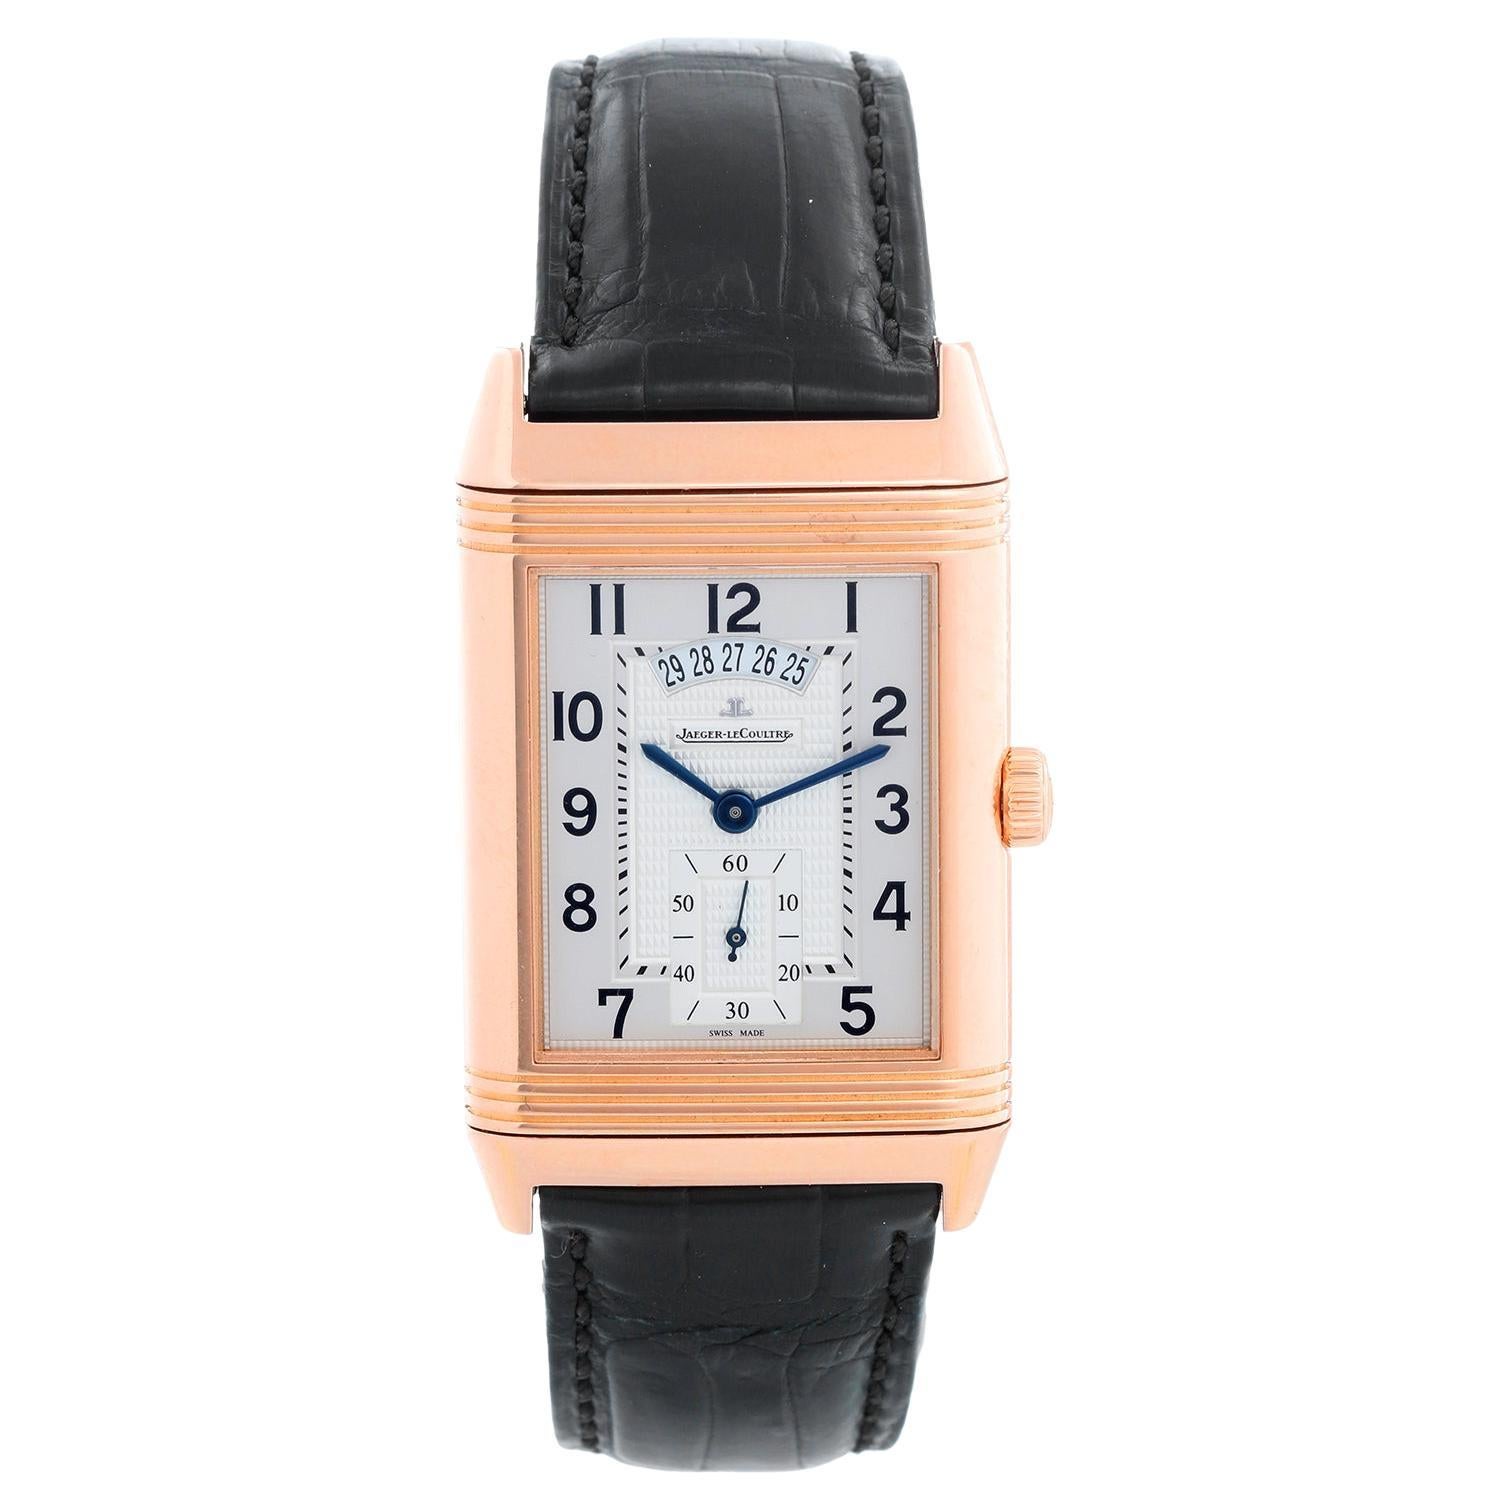 Jaeger LeCoultre Reverso Grande Duo Rose Gold Watch Q3742521 - Manual winding. Roes gold case ( 32mm x 44mm ). Silver dial with fine textured rim and Arabic numerals; Black dial with guilloche texture and white painted Arabic numerals. New black